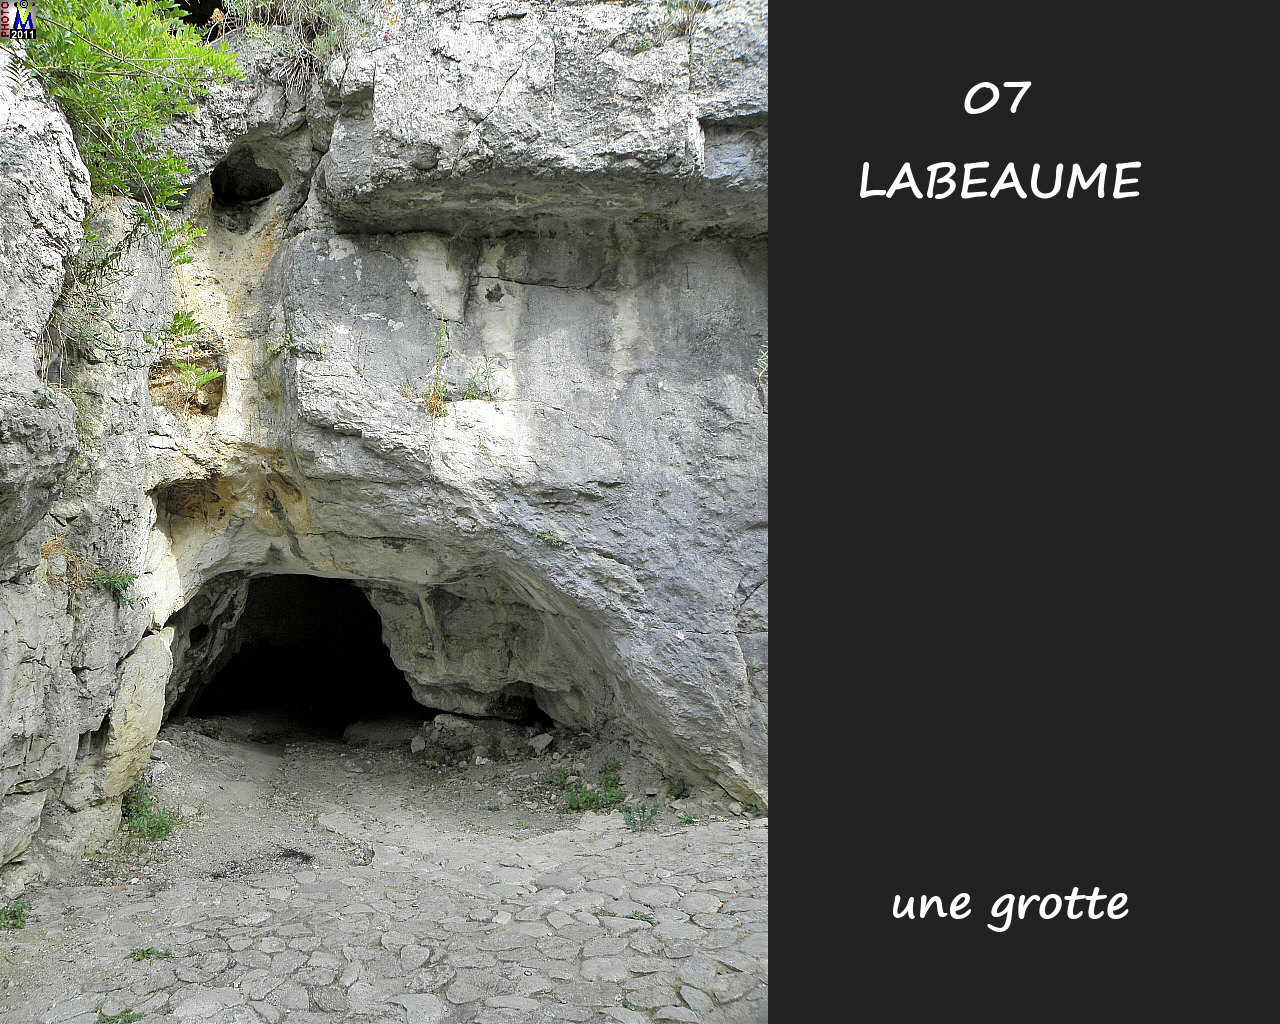 07LABEAUME_grotte_104.jpg